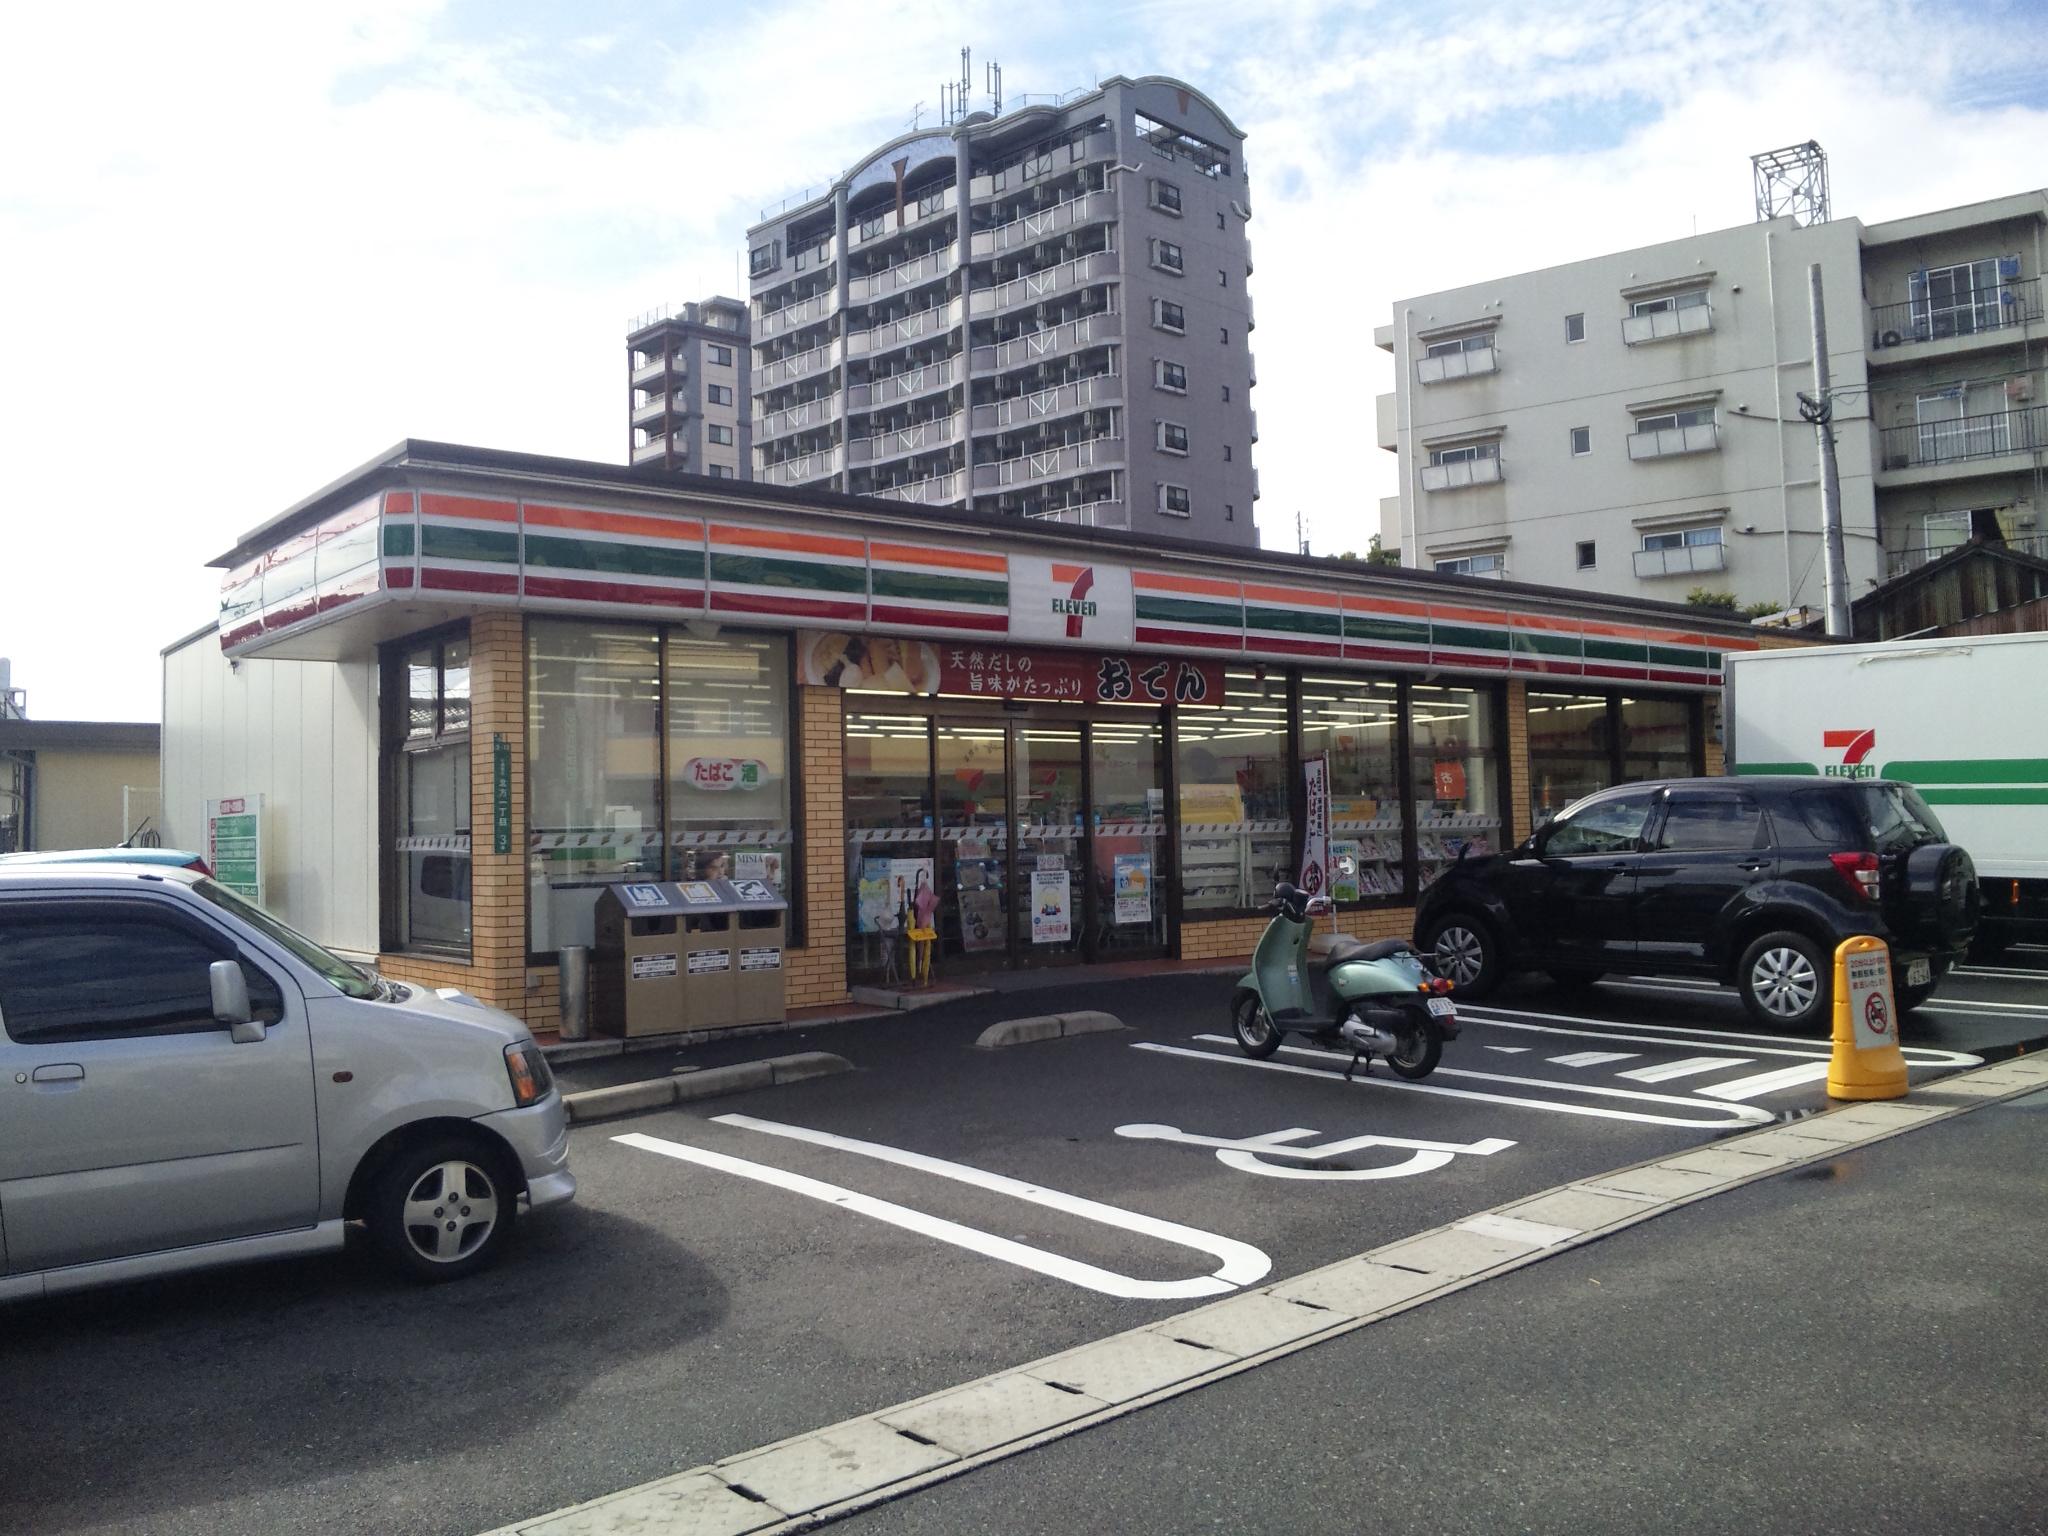 Convenience store. Seven-Eleven Kokura how 1-chome to (convenience store) 183m